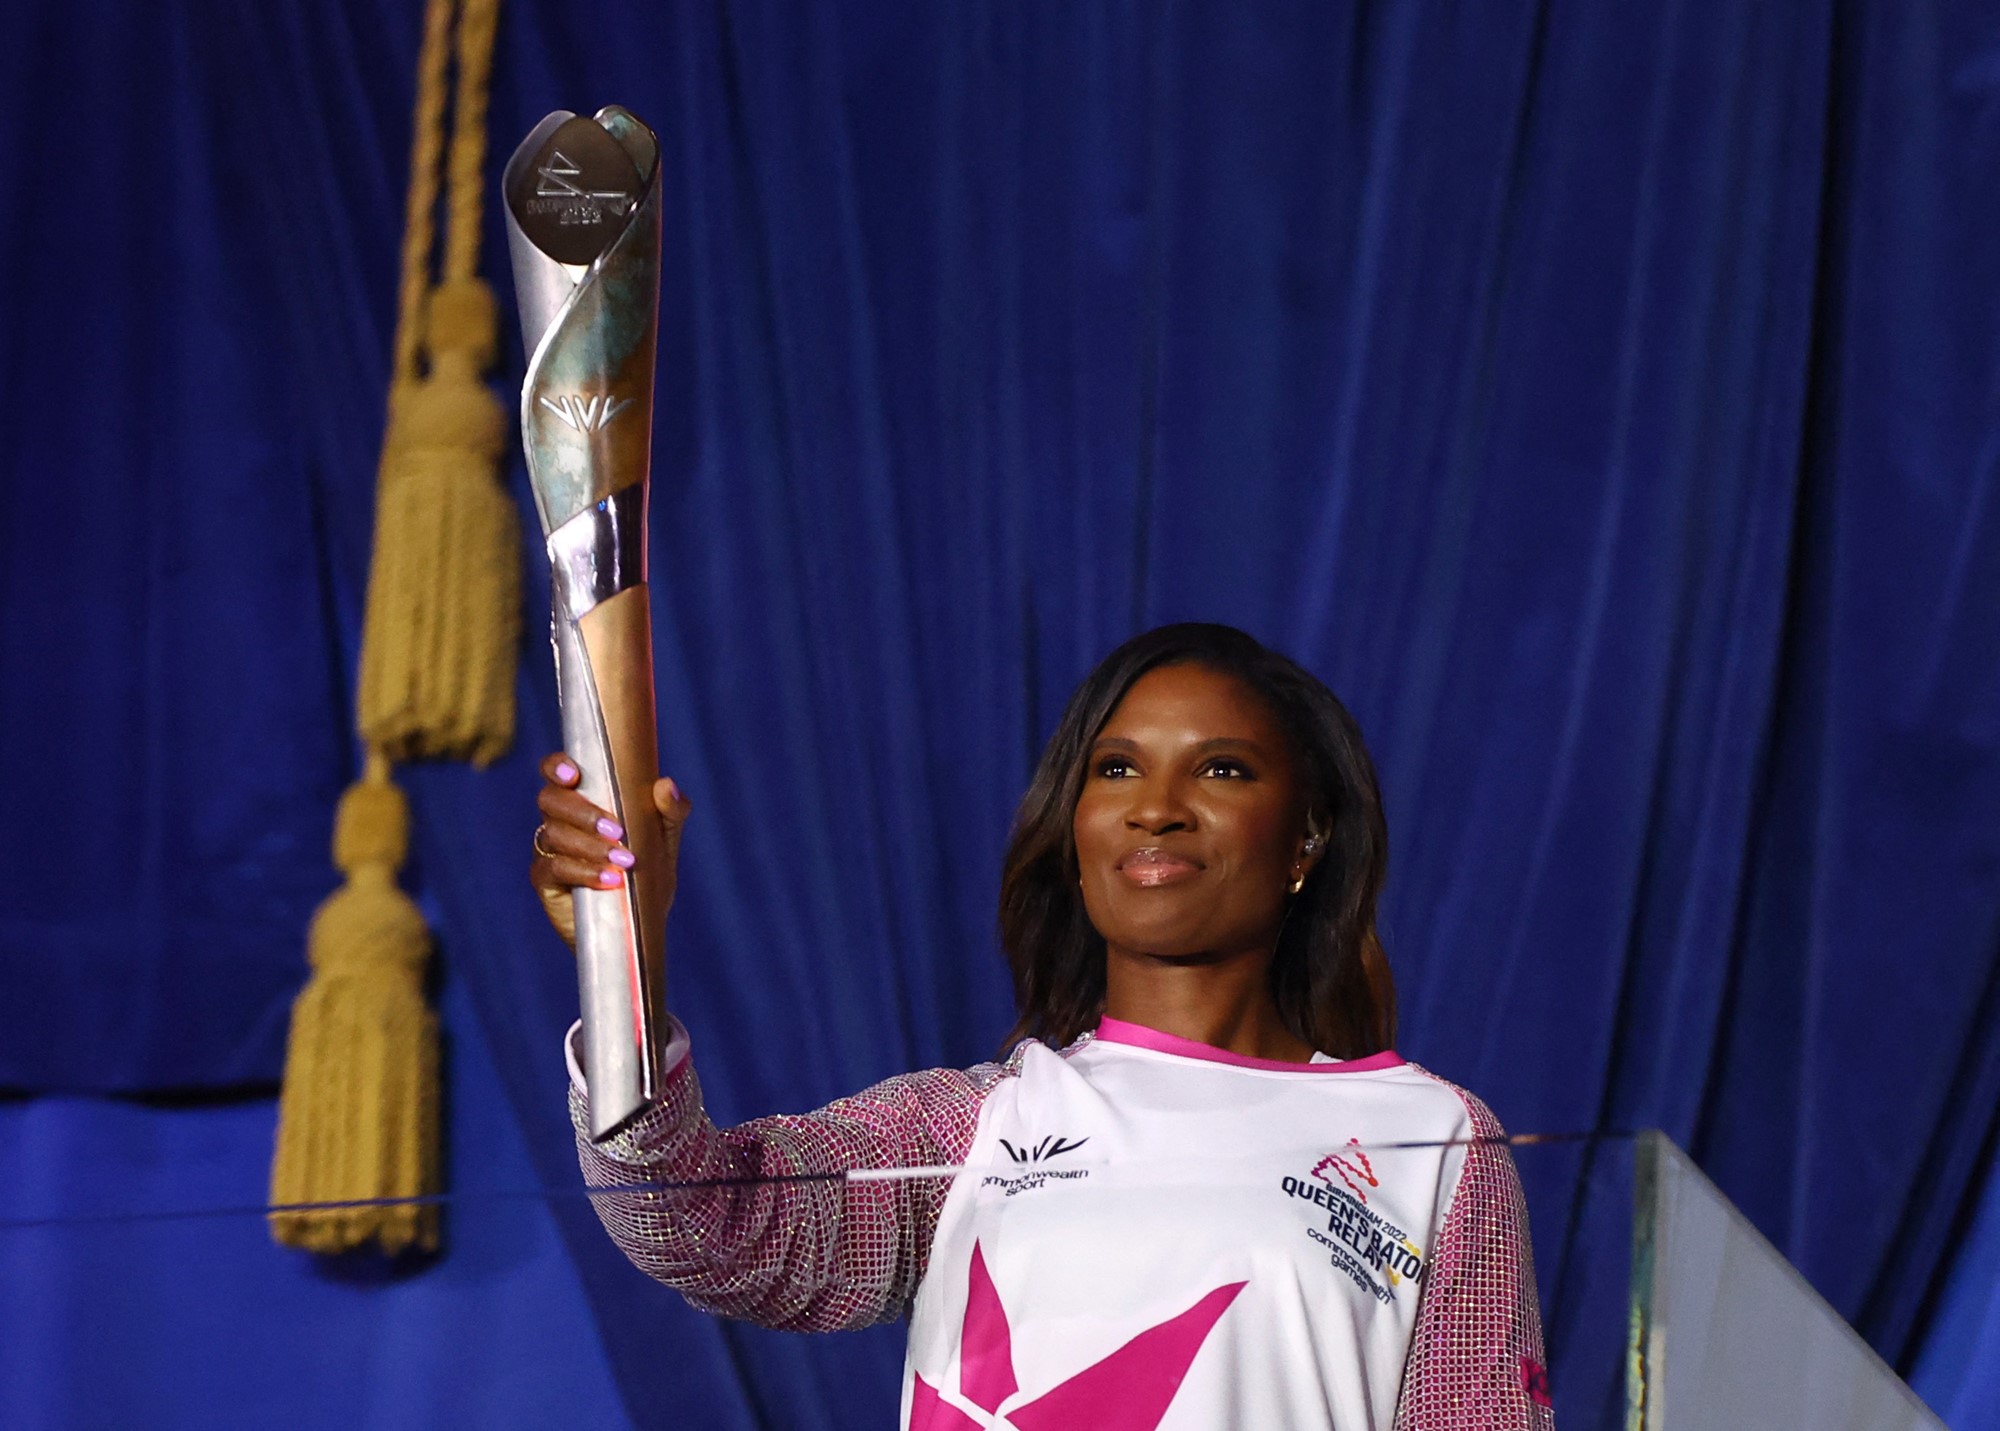 denise lewis holds the queen's baton